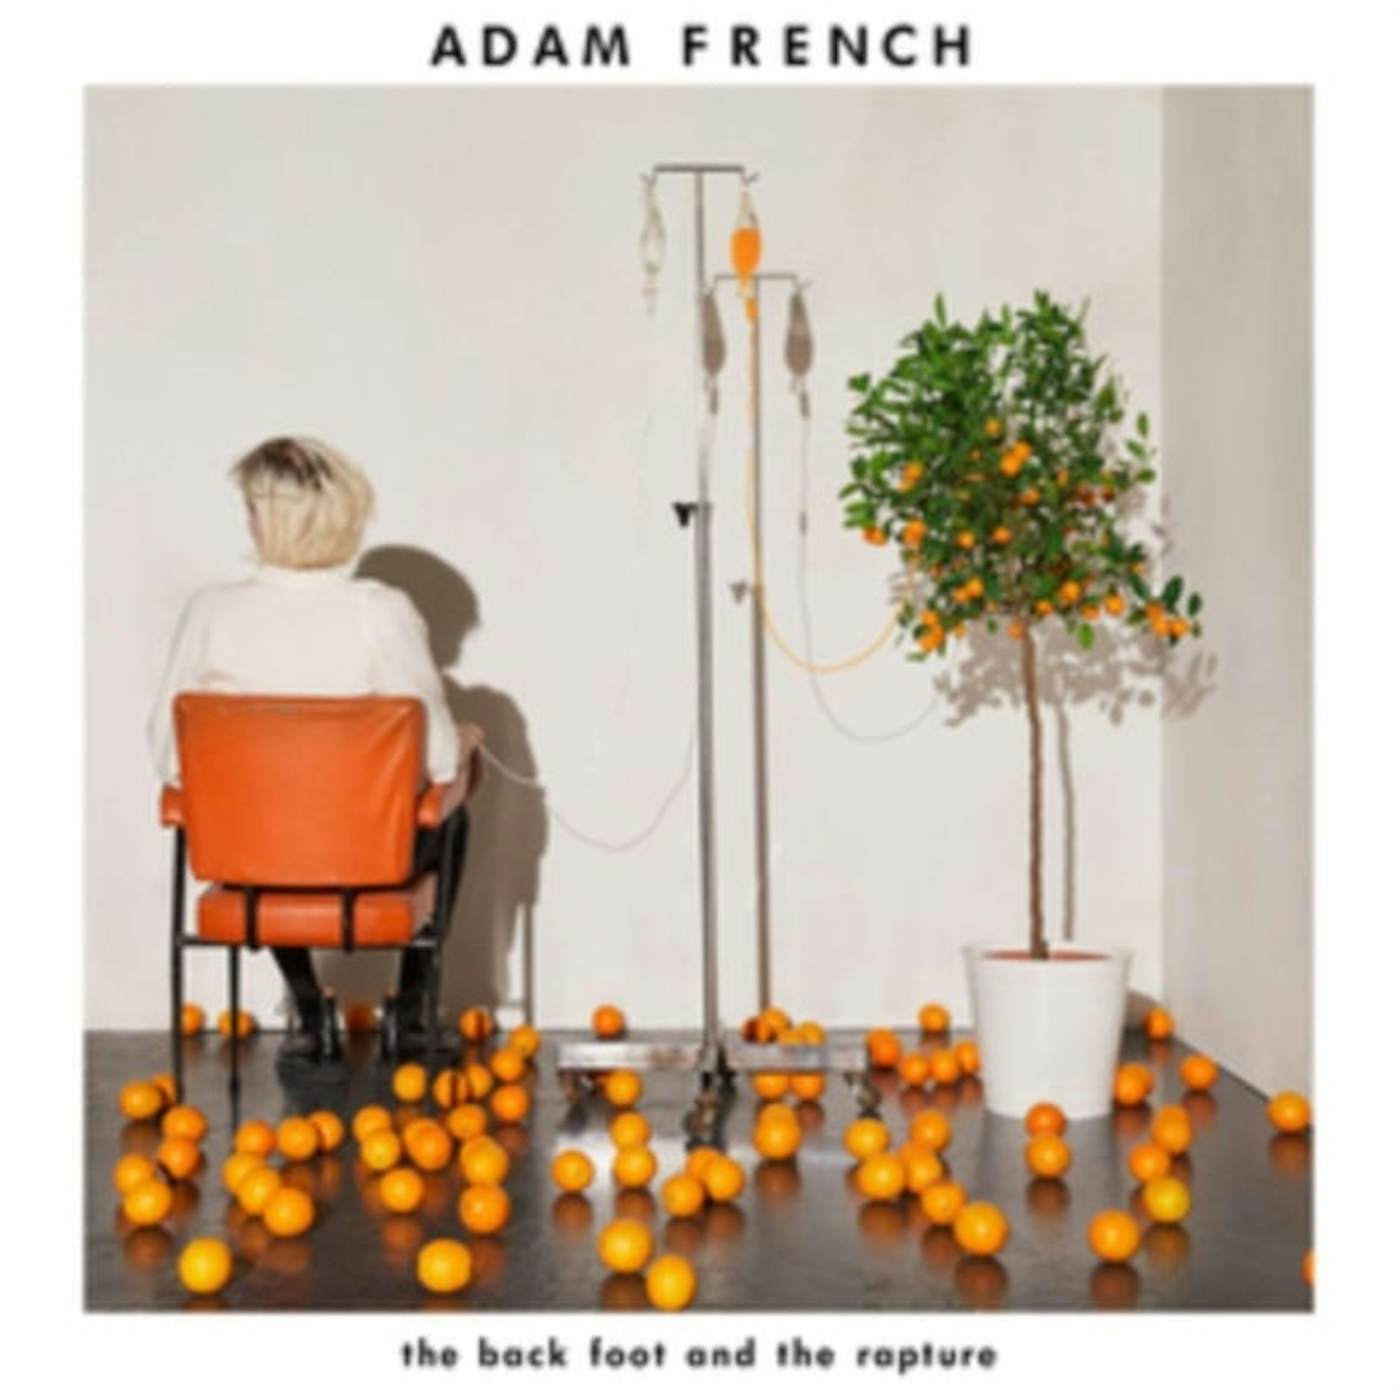 Adam French LP Vinyl Record - The Back Foot And The Rapture